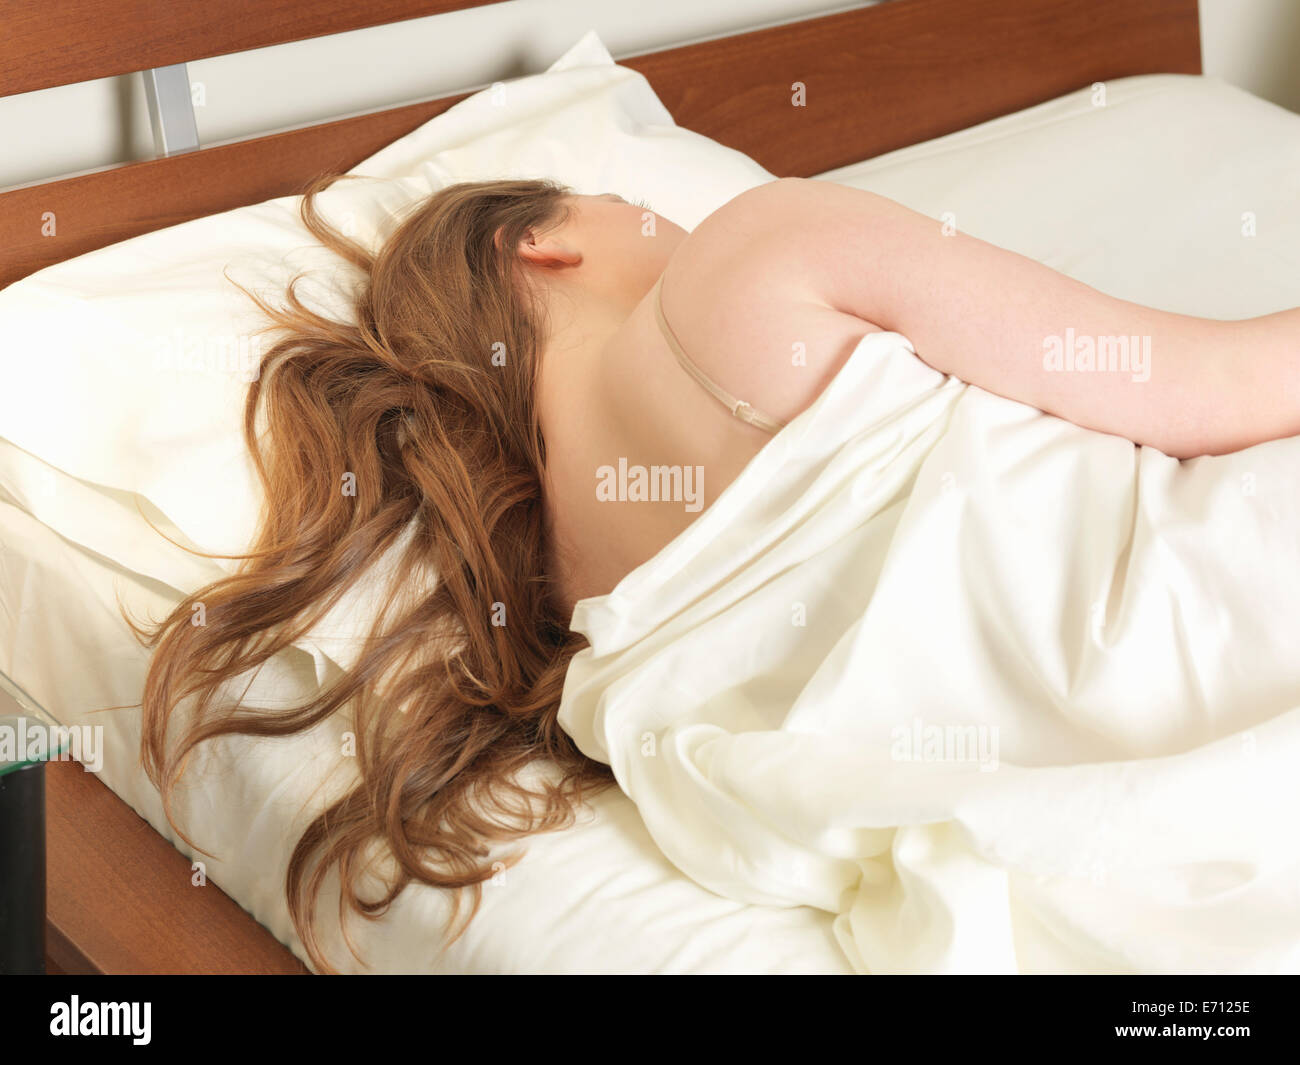 Rear view of young woman sleeping in bed Stock Photo